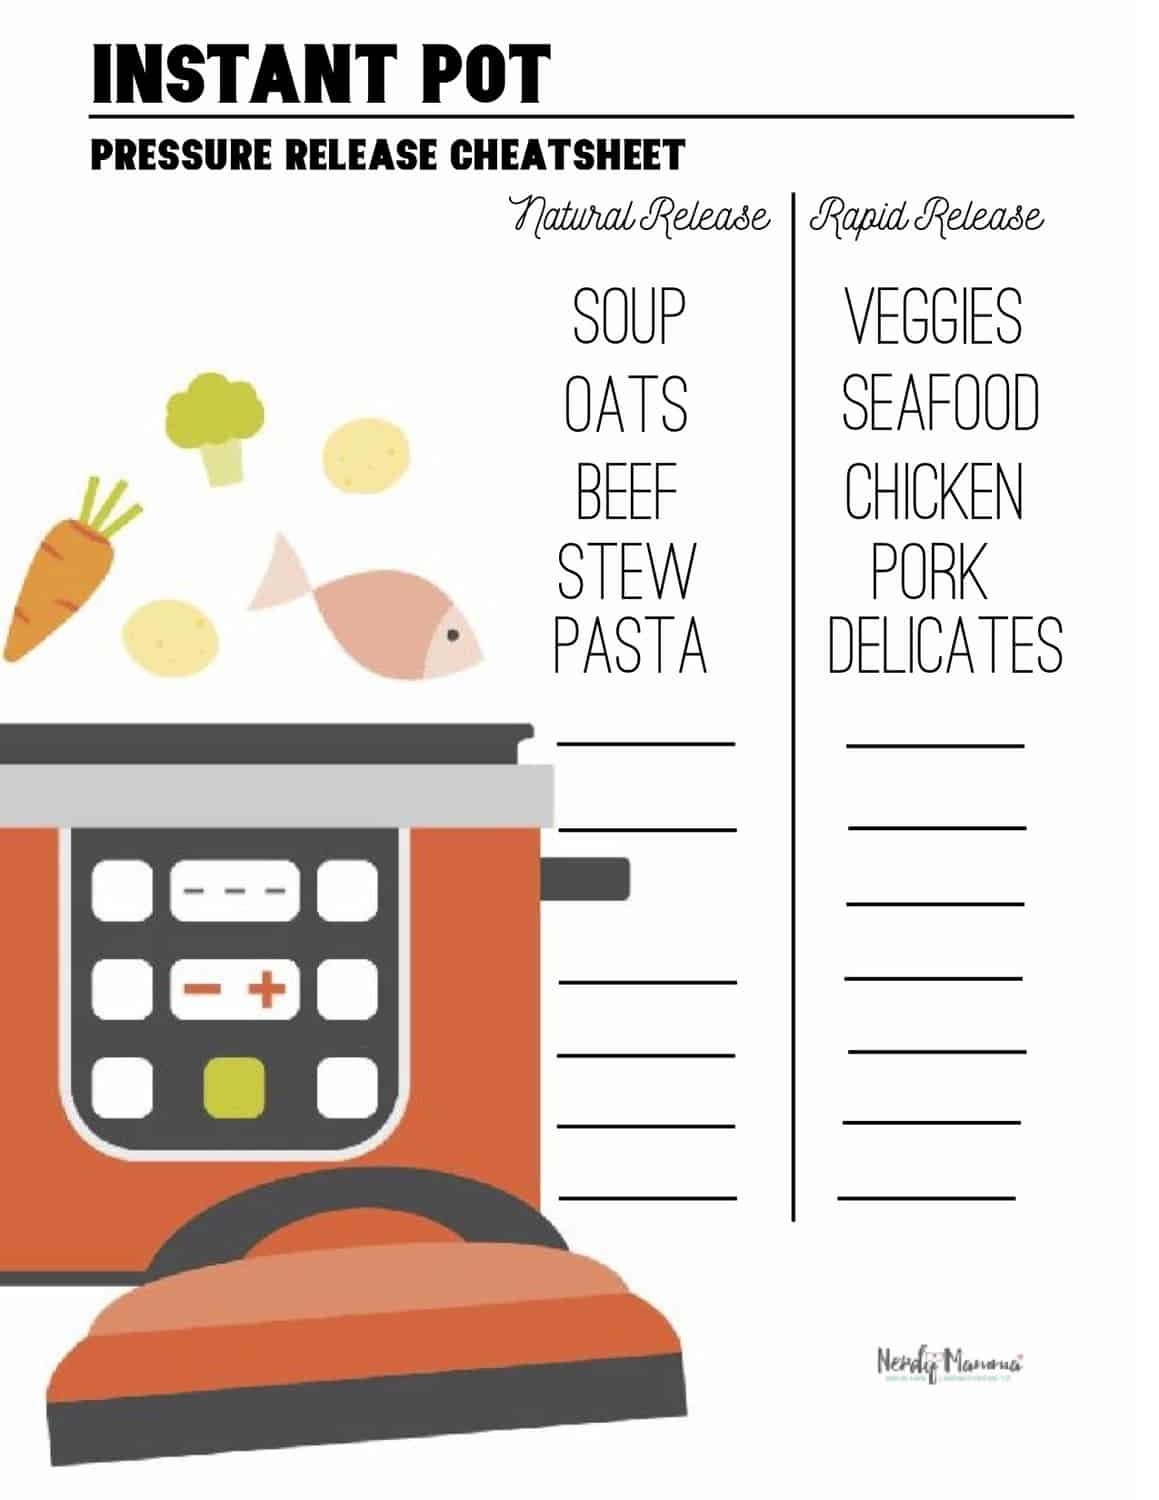 Instant Pot Cook Time Infographics, Charts, And Cheat Sheets